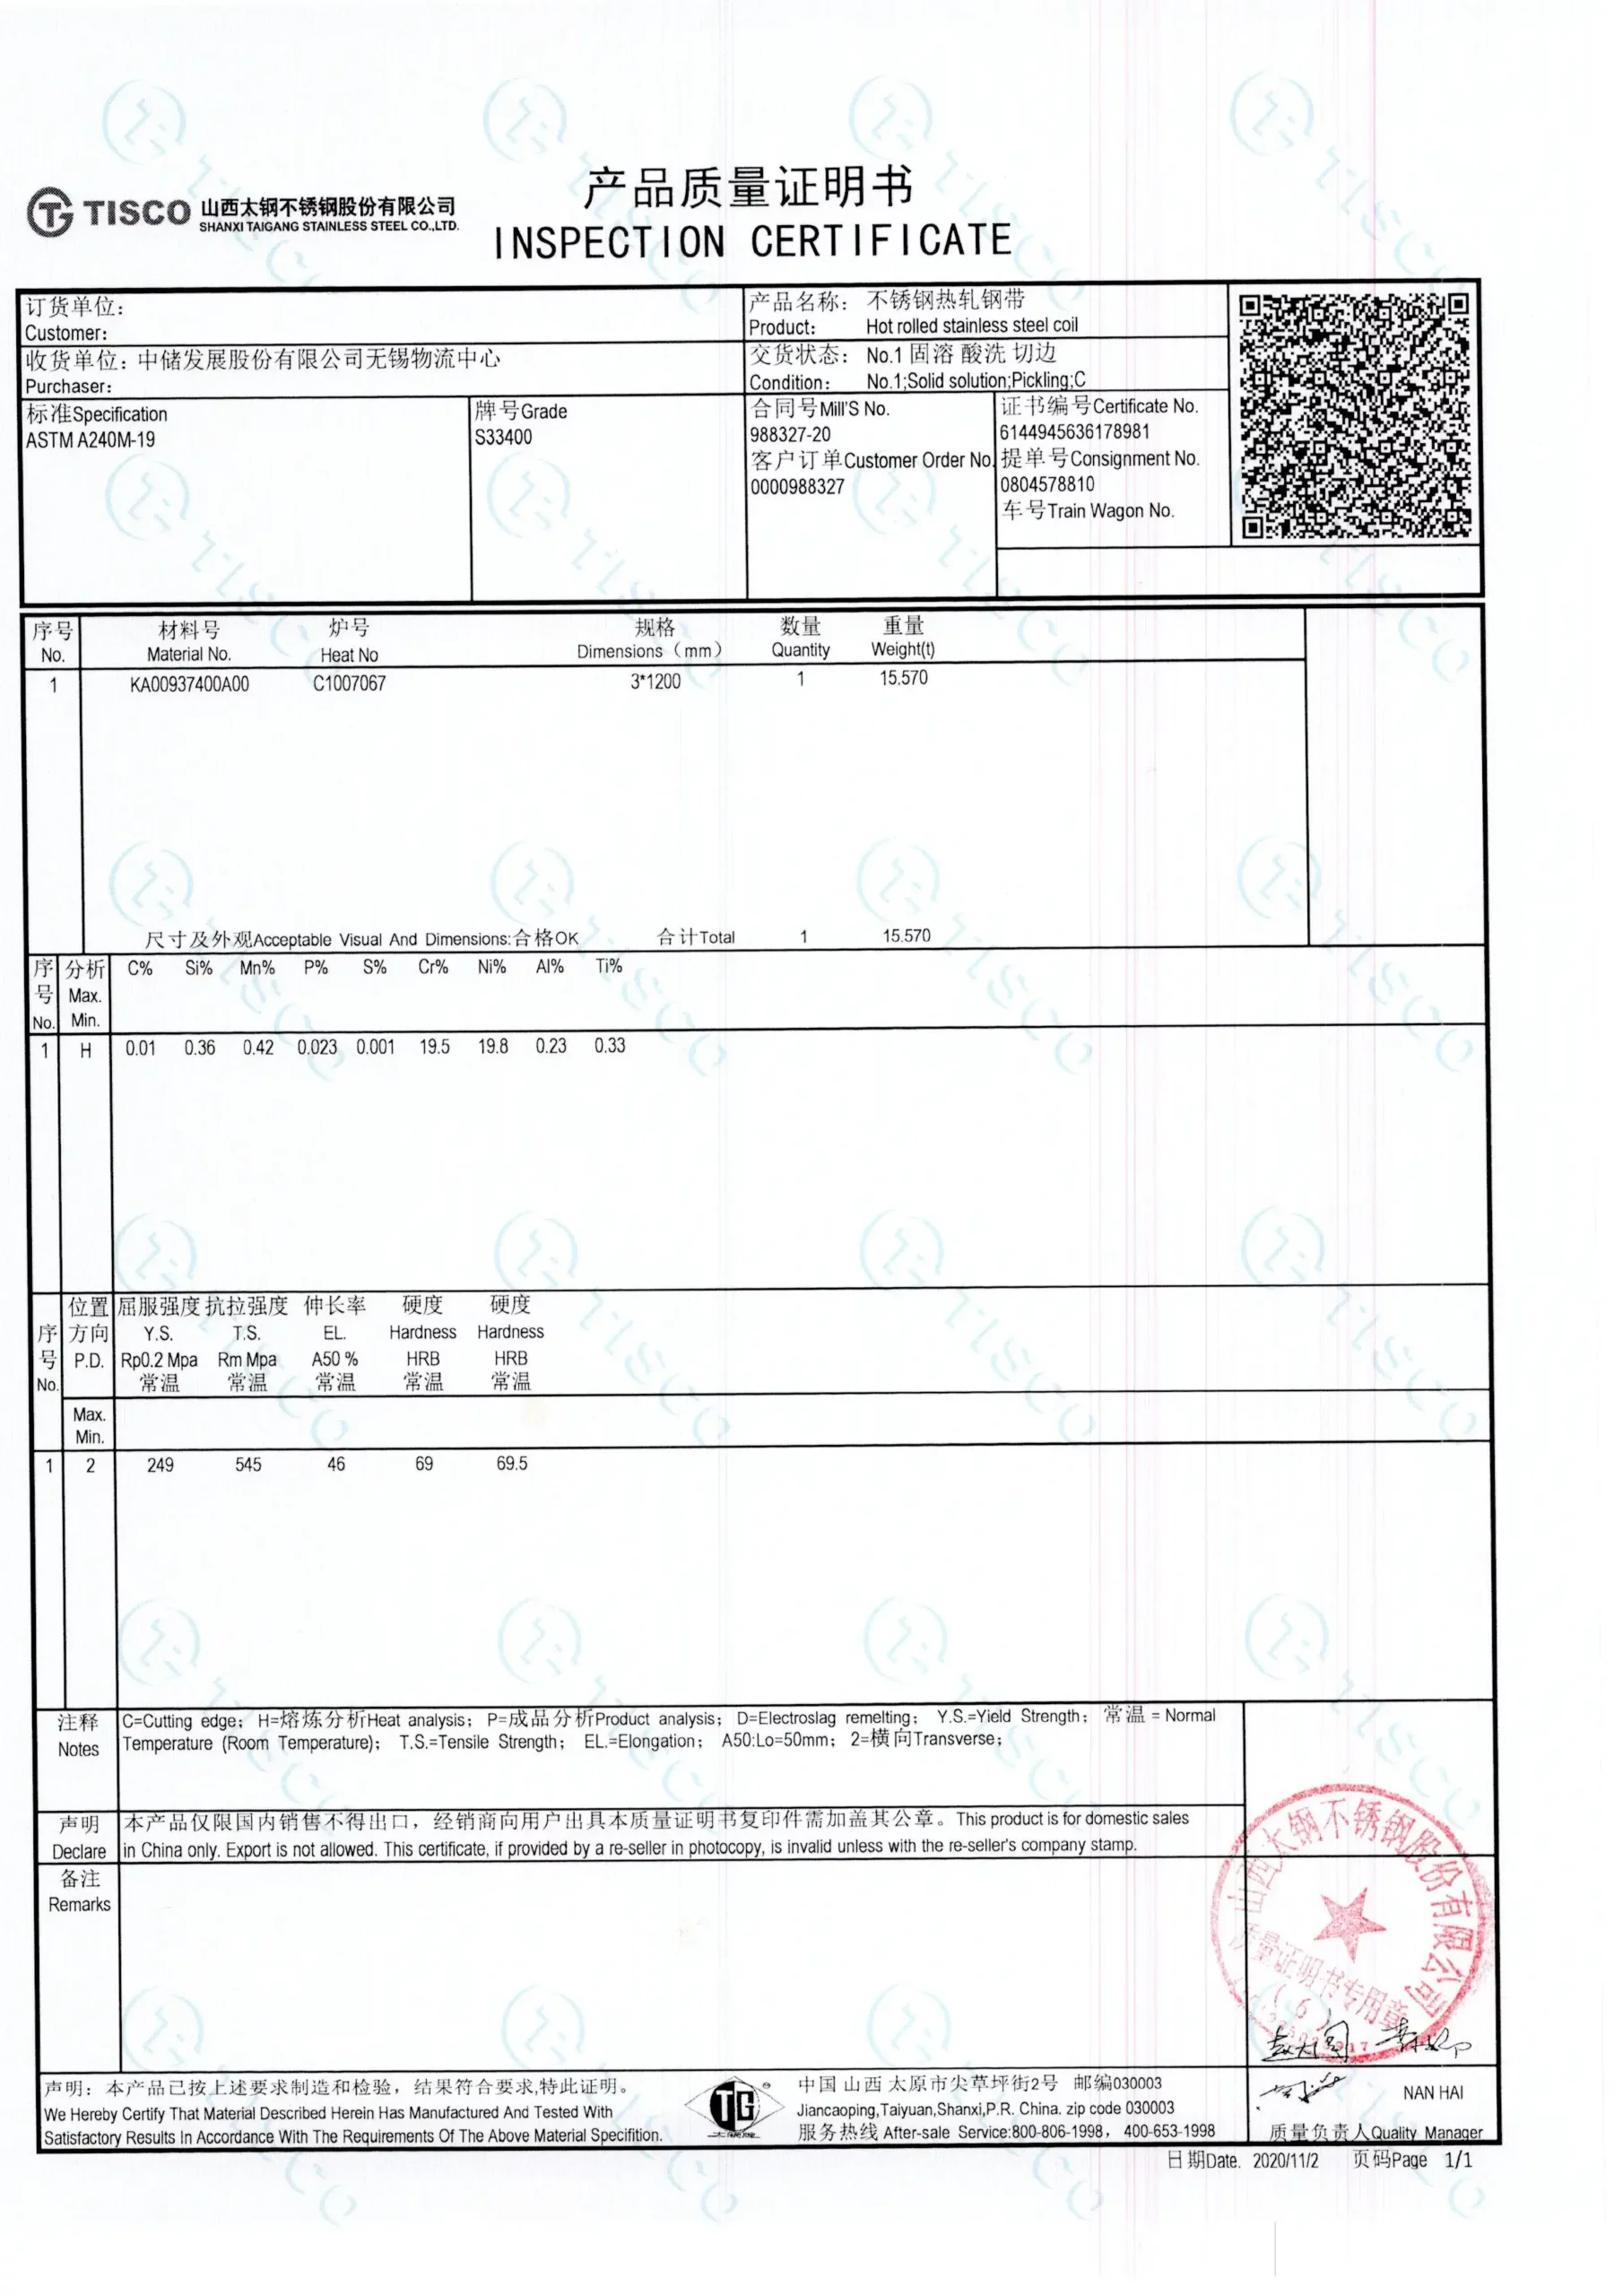 840 s33400 stainless steel tisco inspection certificate